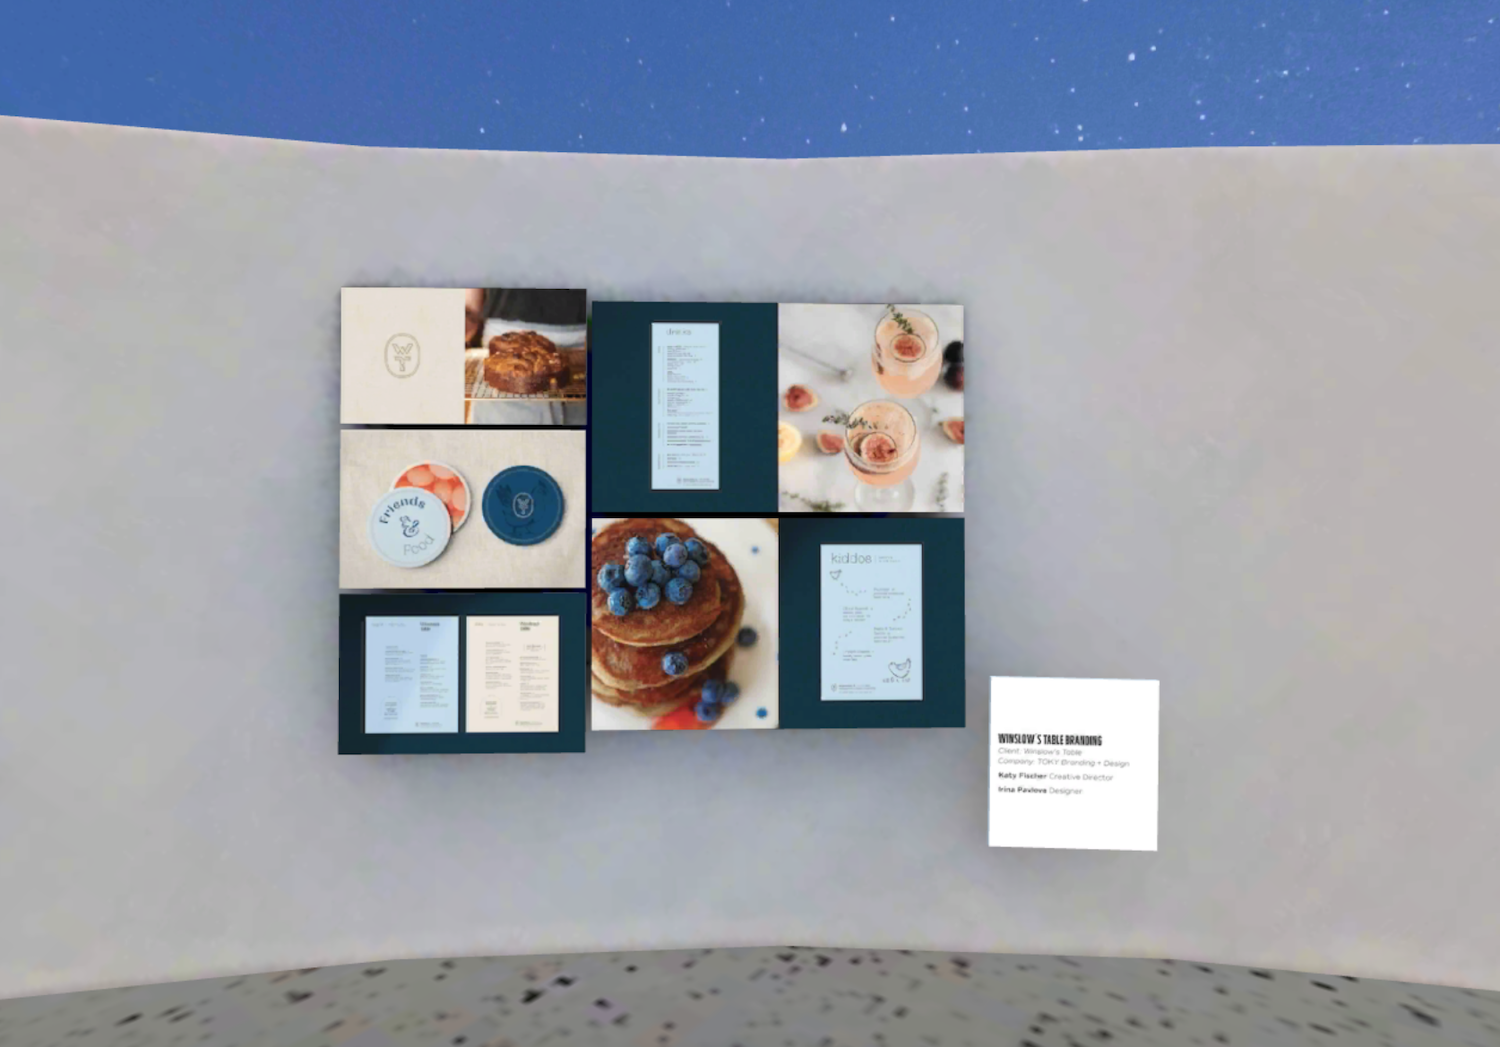 Winslow's Table branding displayed in AIGA STL Design Show virtual gallery